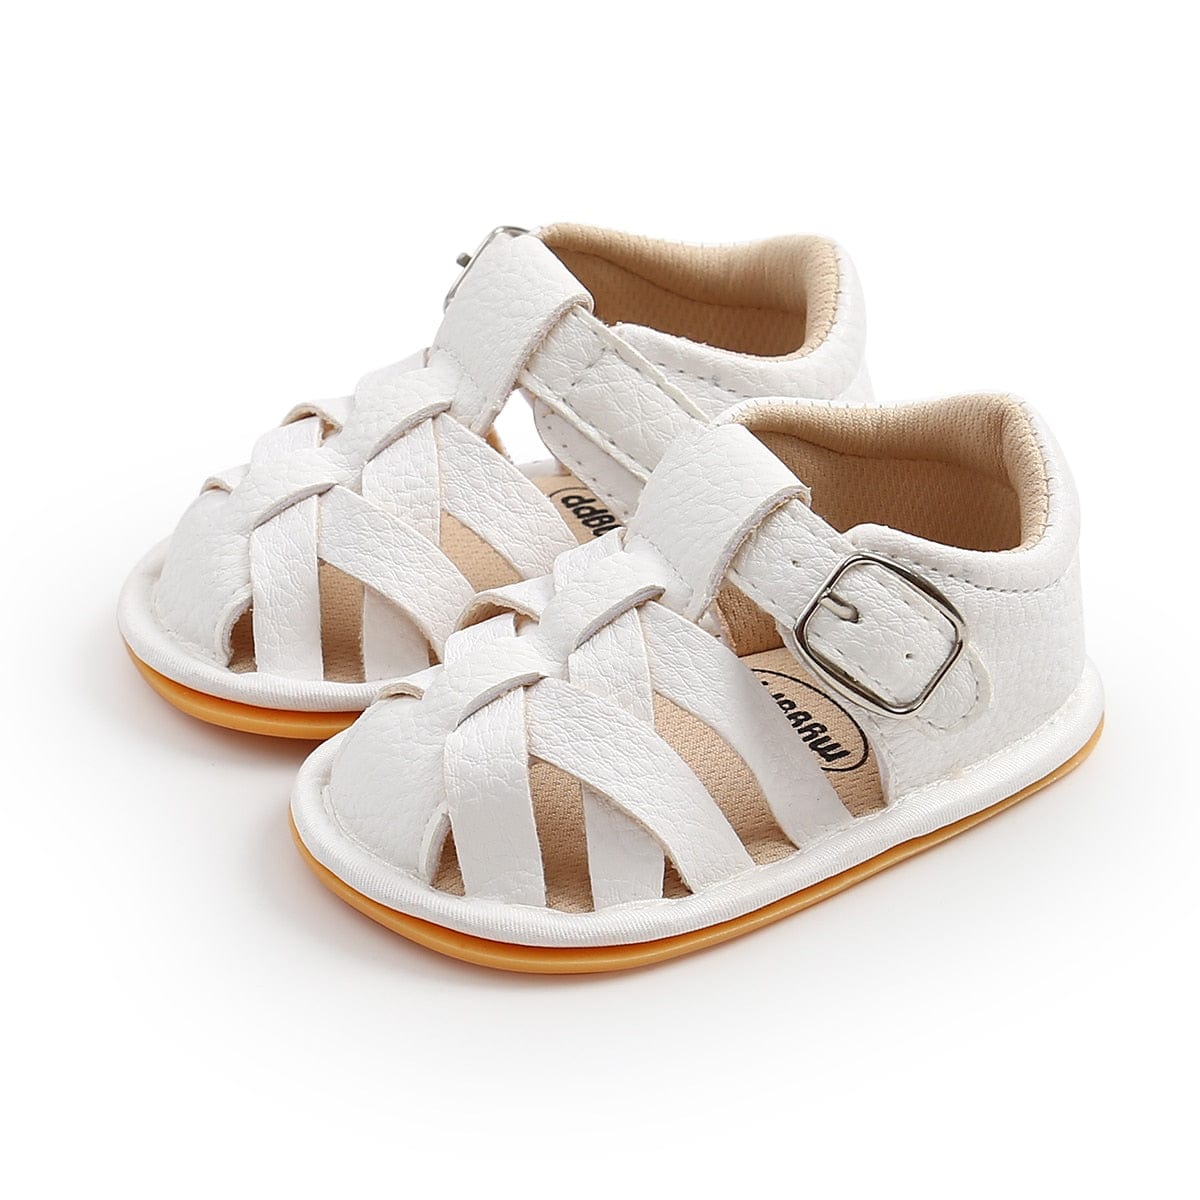 Proactive Baby Baby Footwear Golden / 0-6 Months MYGGPP Stylish Baby Sandals For Your Little Ones